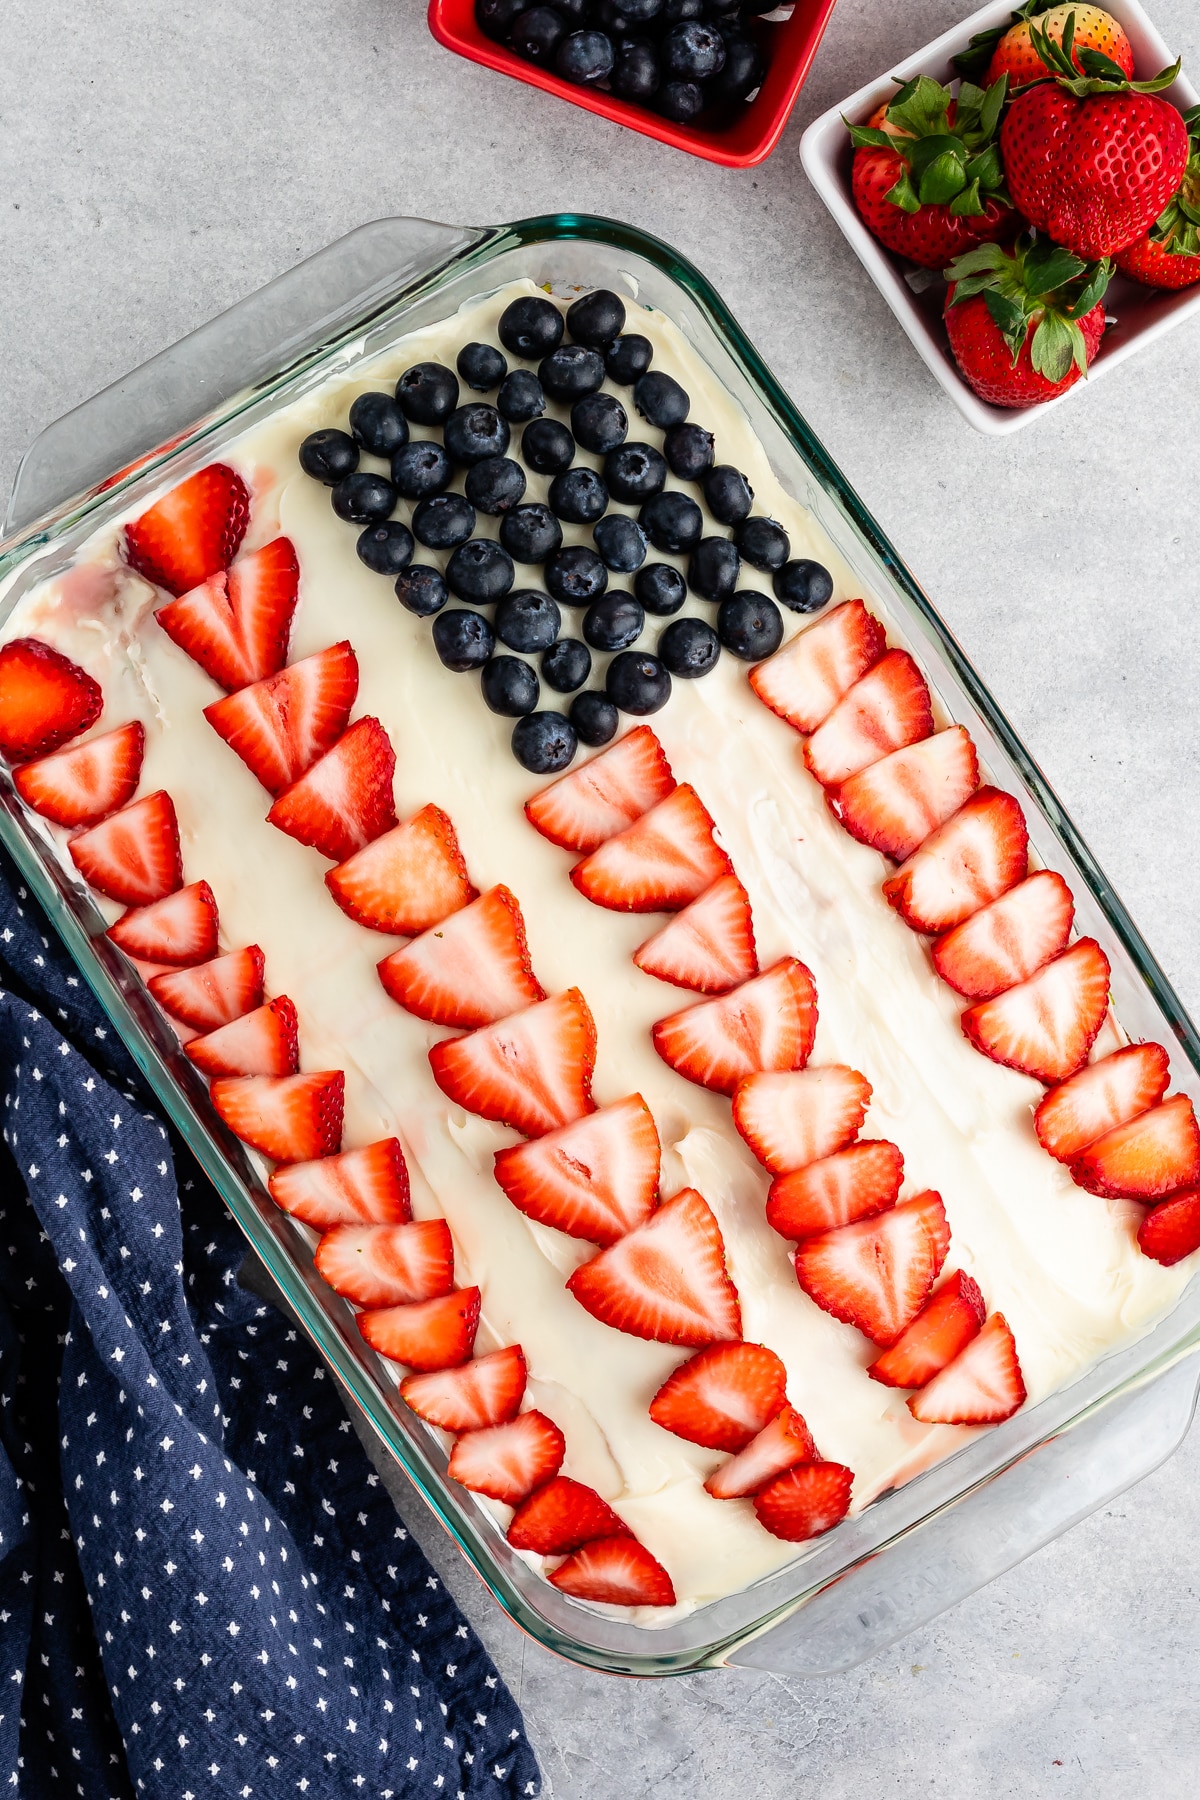 cake with white frosting and sliced strawberry and blueberries on top to make an American flag.